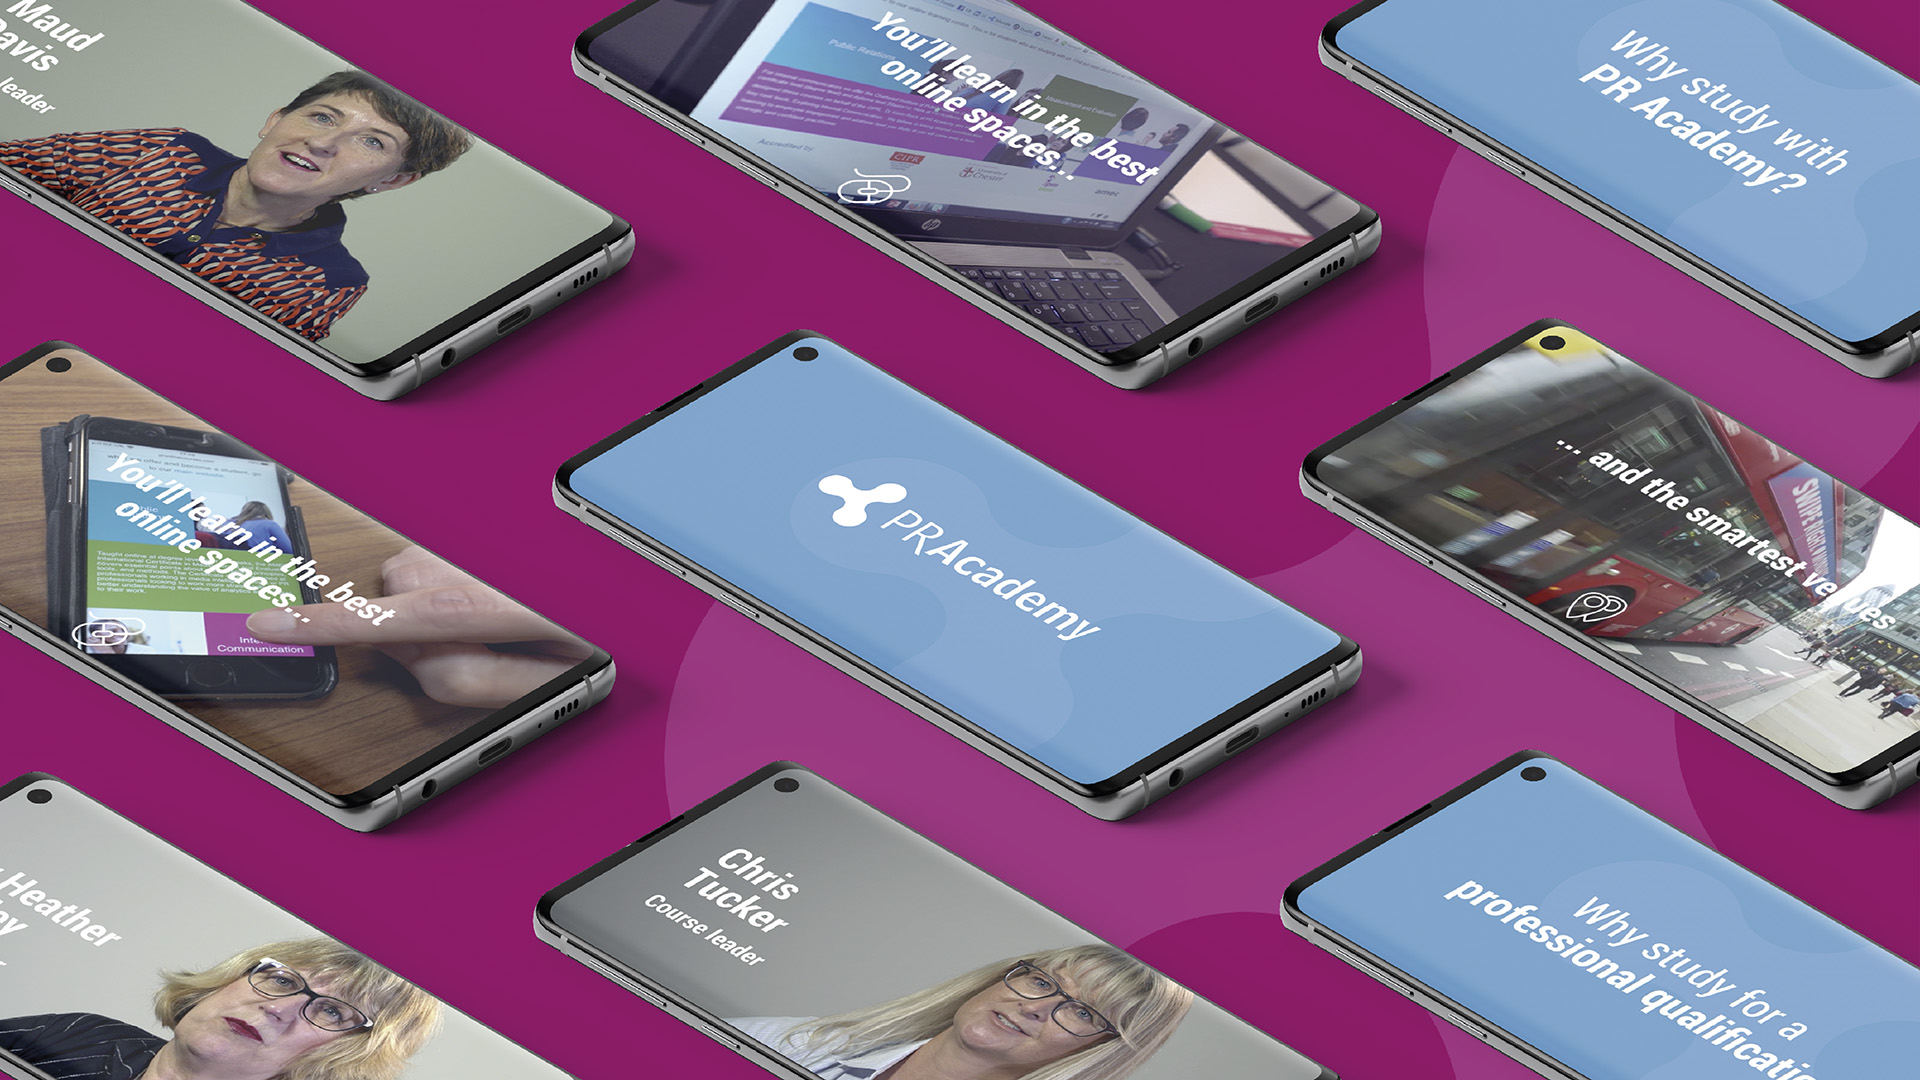 A number of mobile phones on a purple surface displaying the PR Academy Video stills and graphics